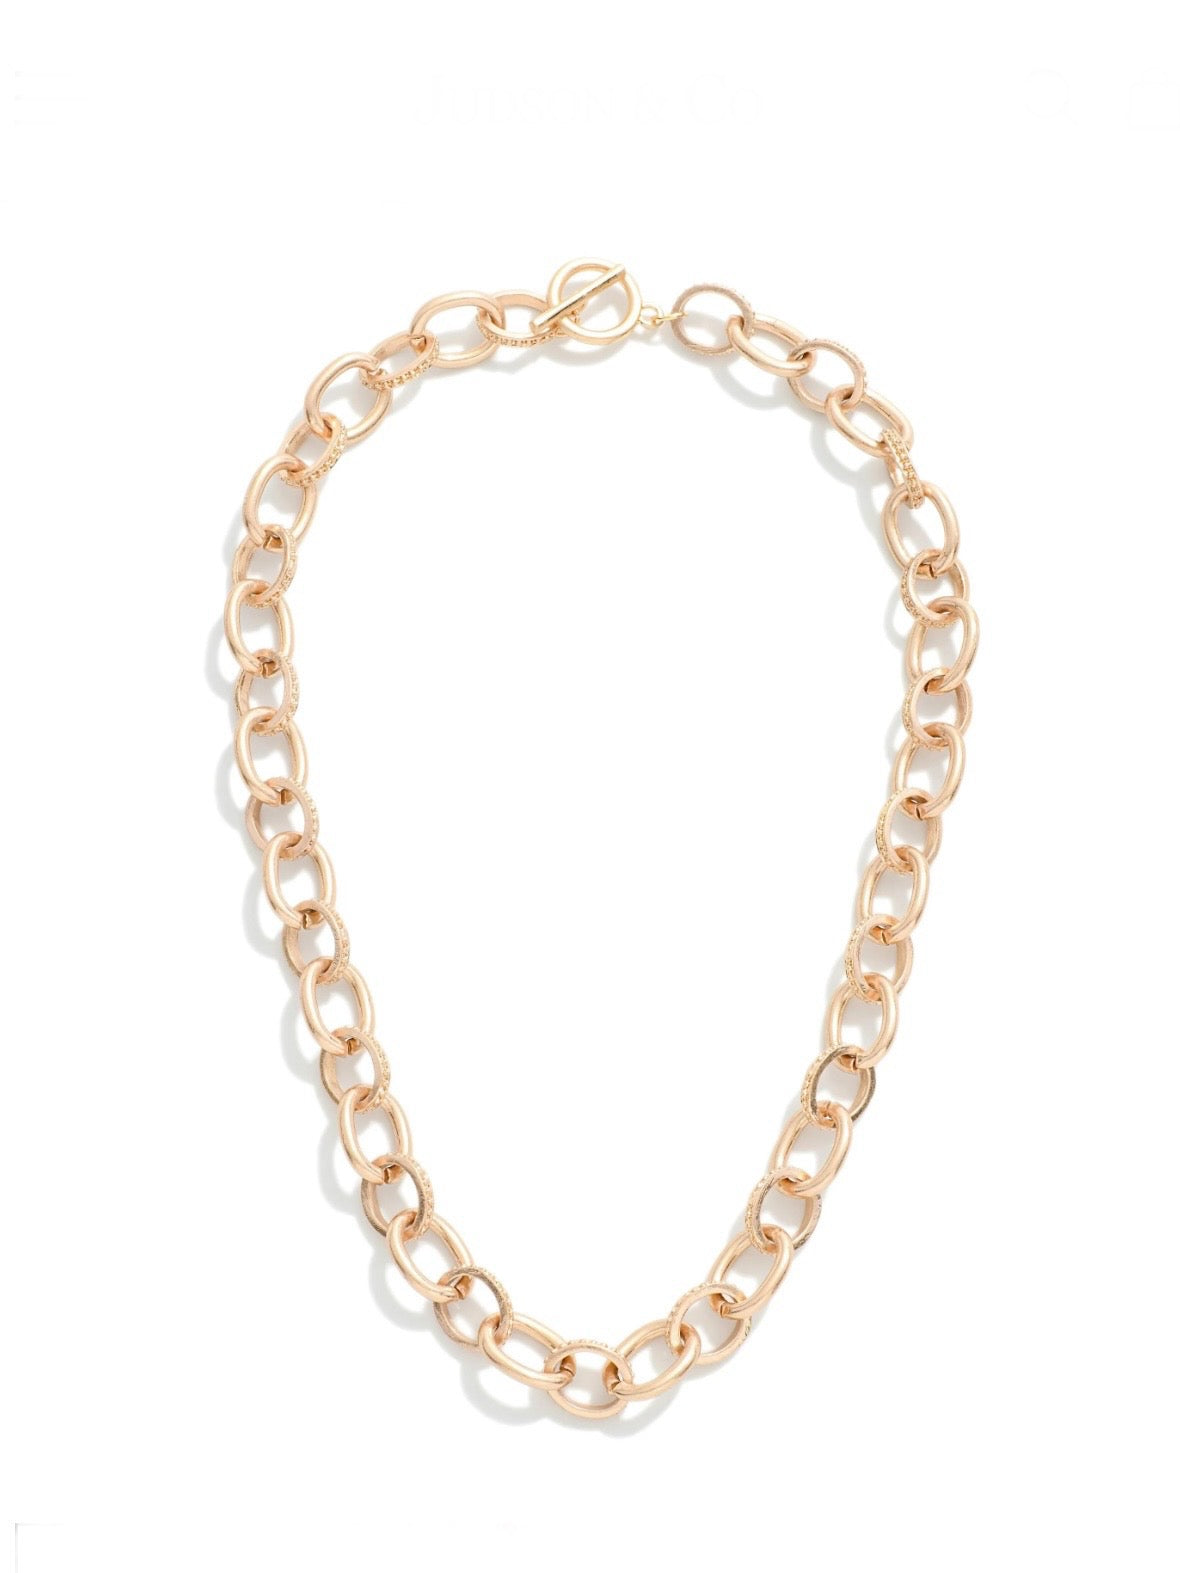 T-BAR CLOSURE CHAIN LINK NECKLACE